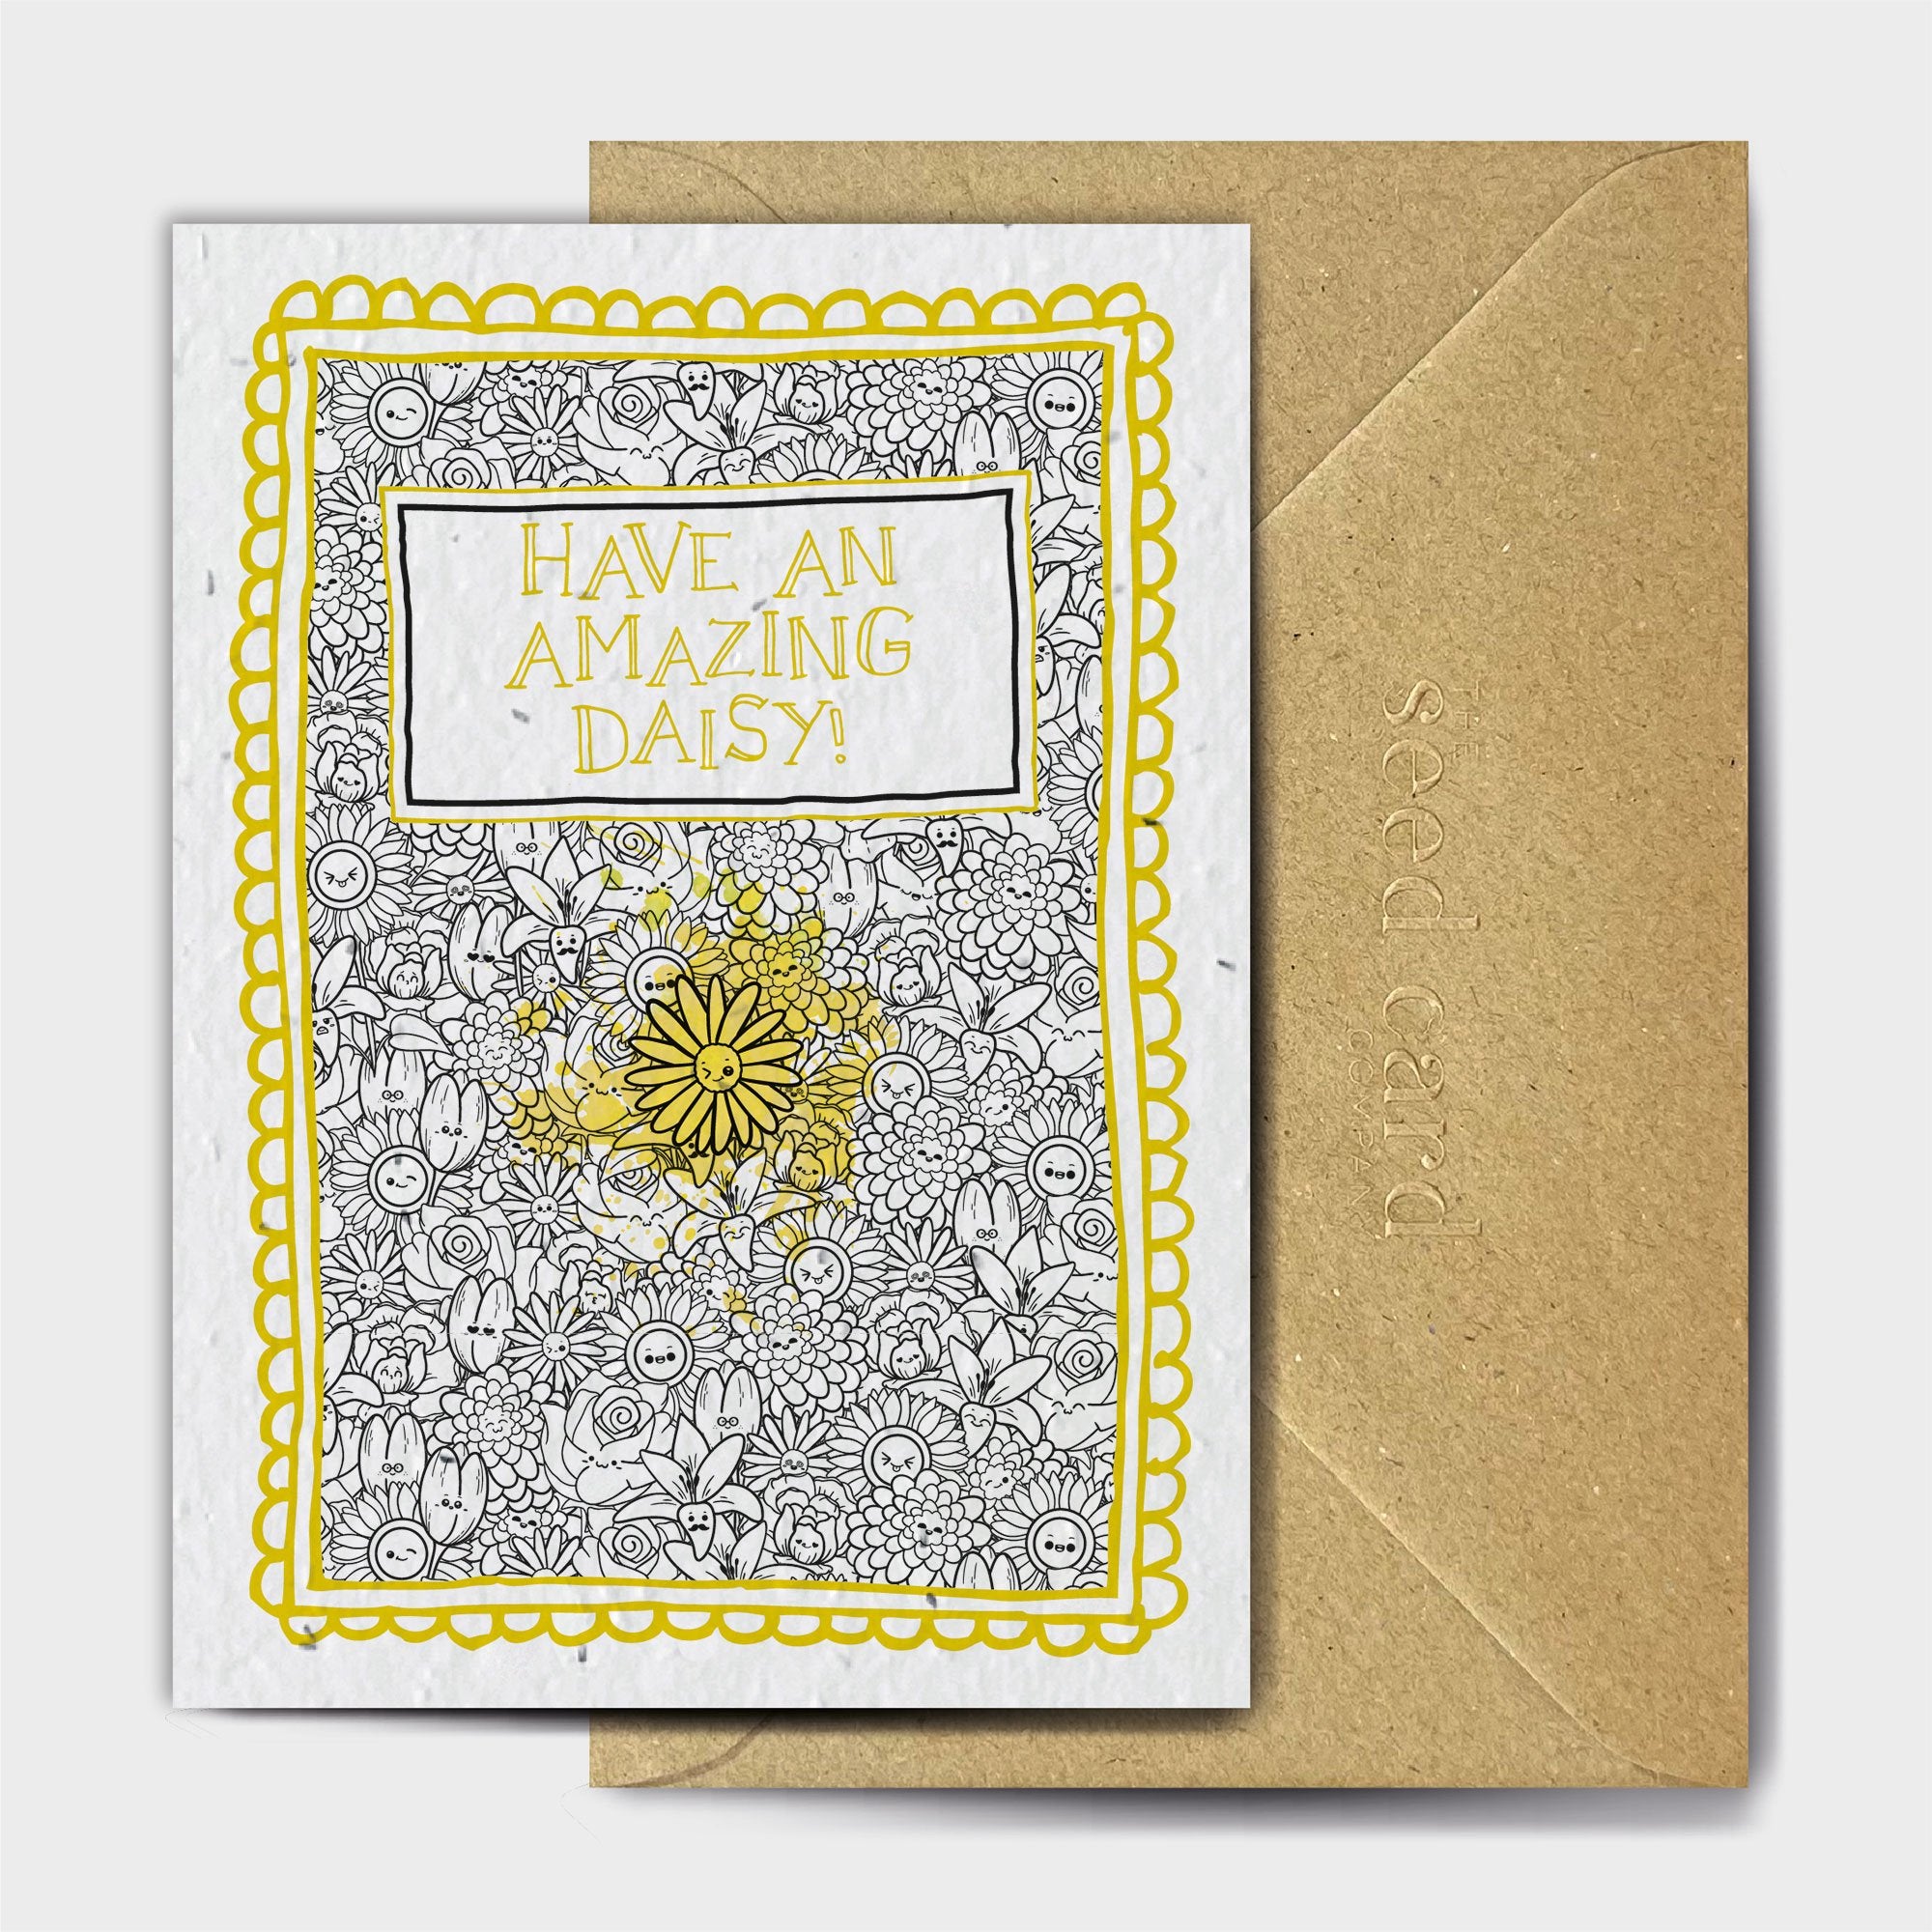 Shop online Amazy Daisy - 100% biodegradable seed-embedded cards Shop -The Seed Card Company